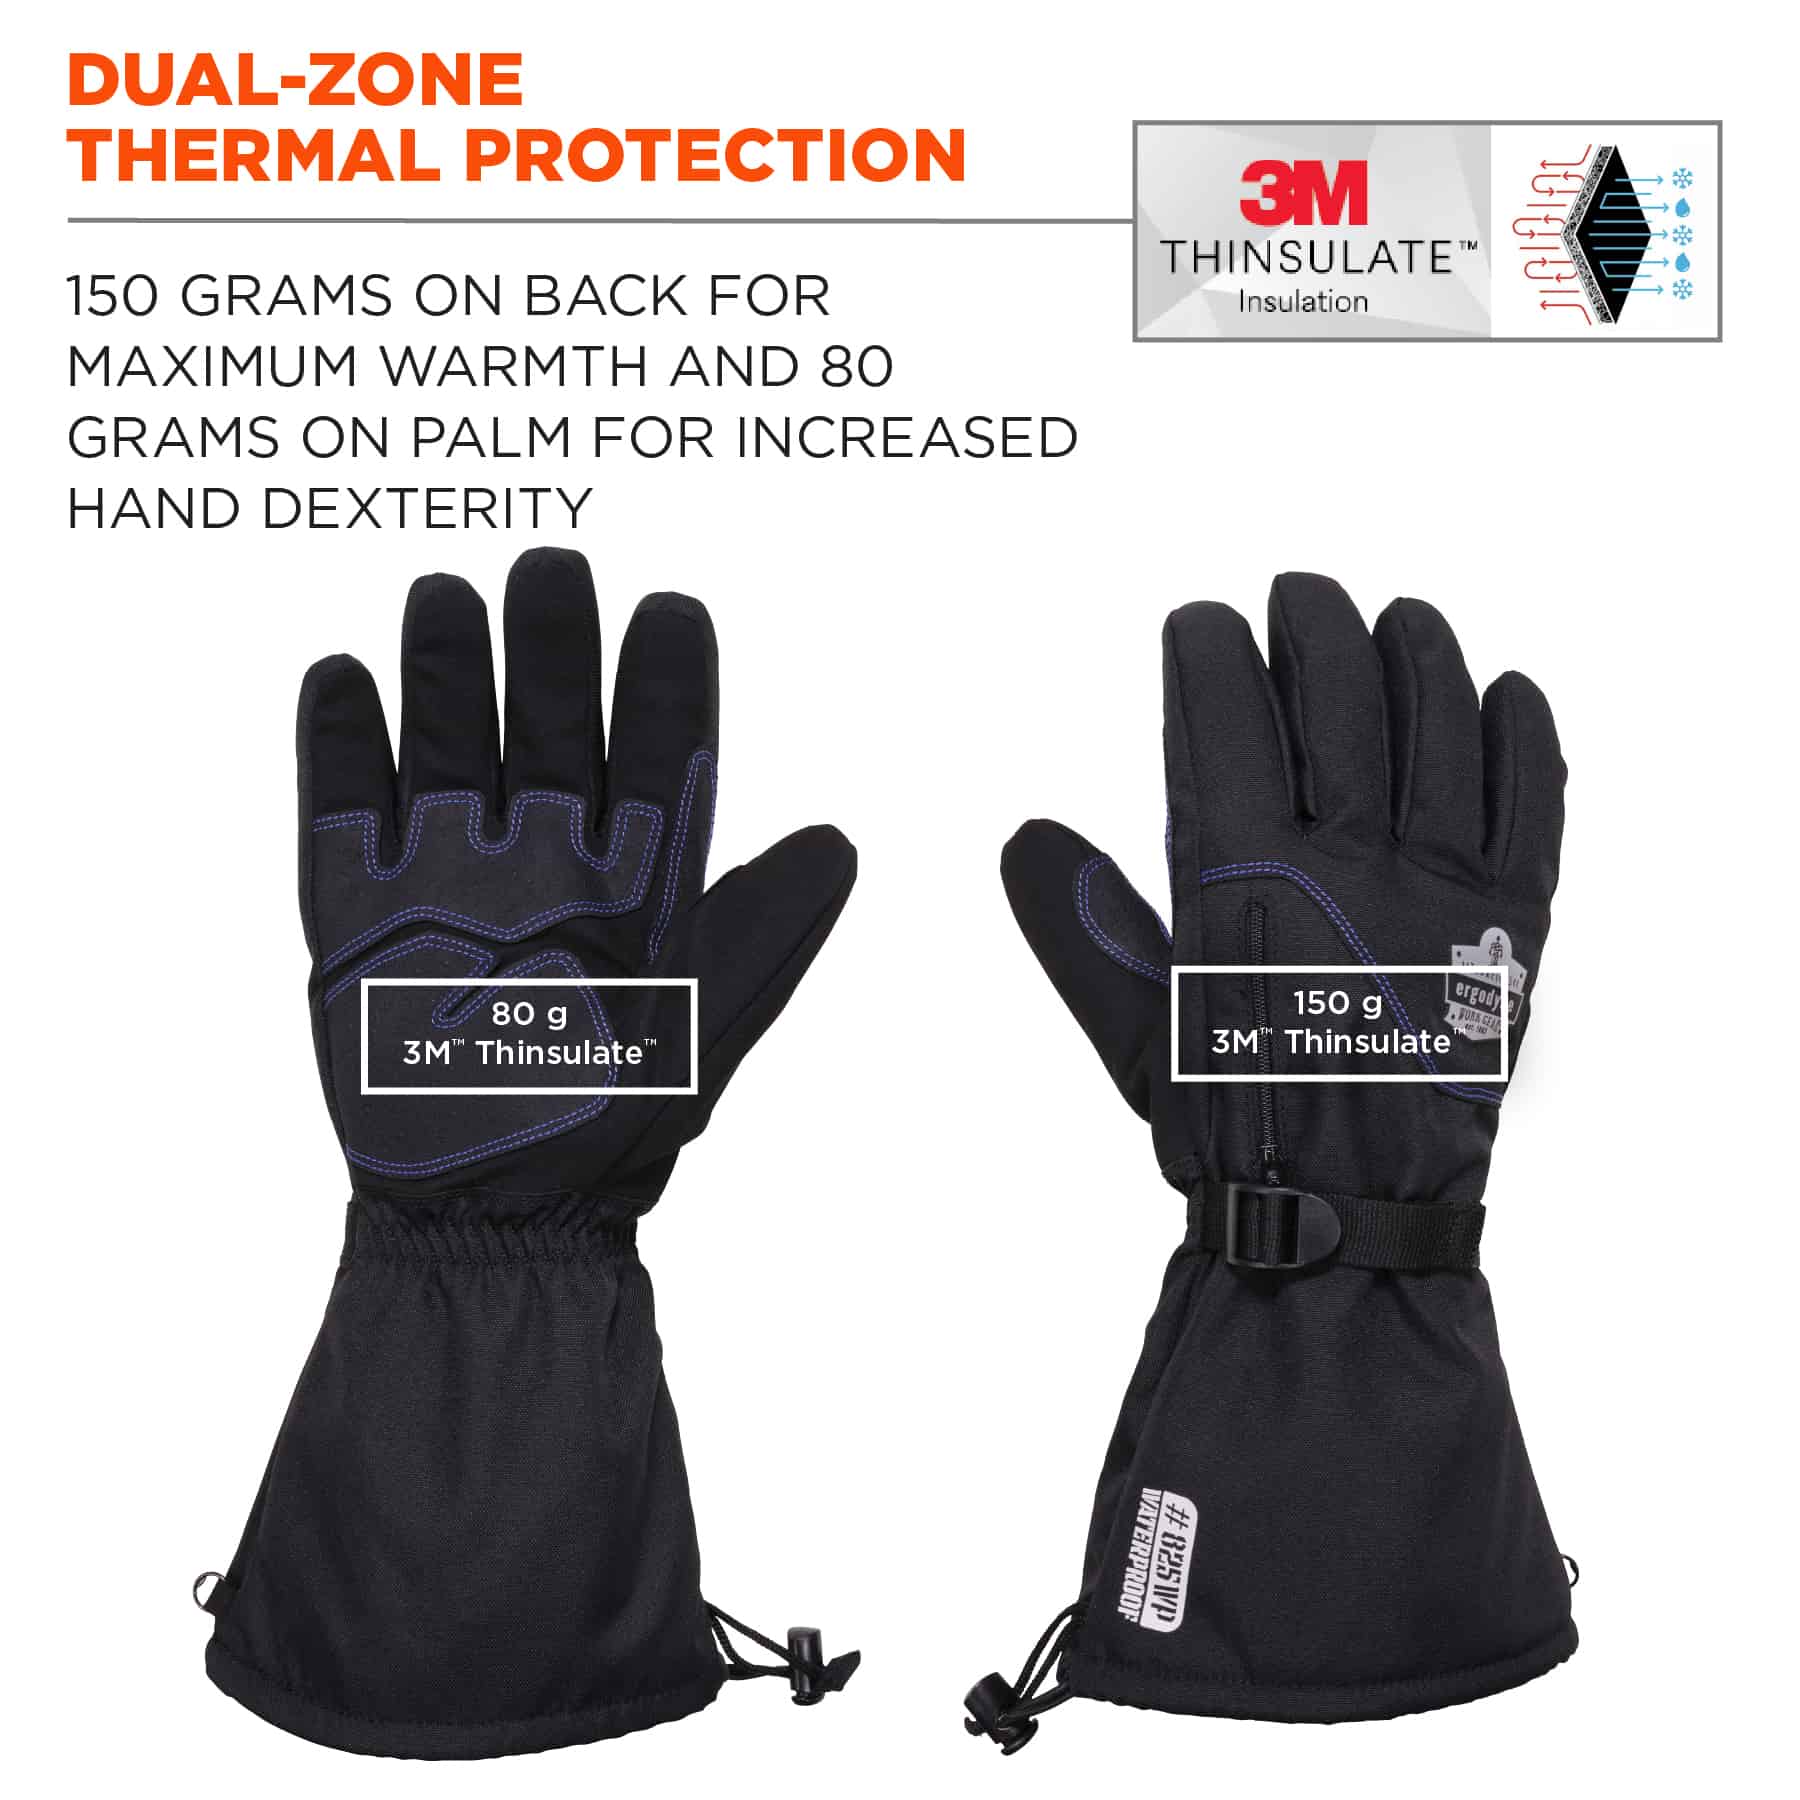 THERMAL INSULATED WINTER COLD SAFETY WATERPROOF SAFETY WORK GLOVES